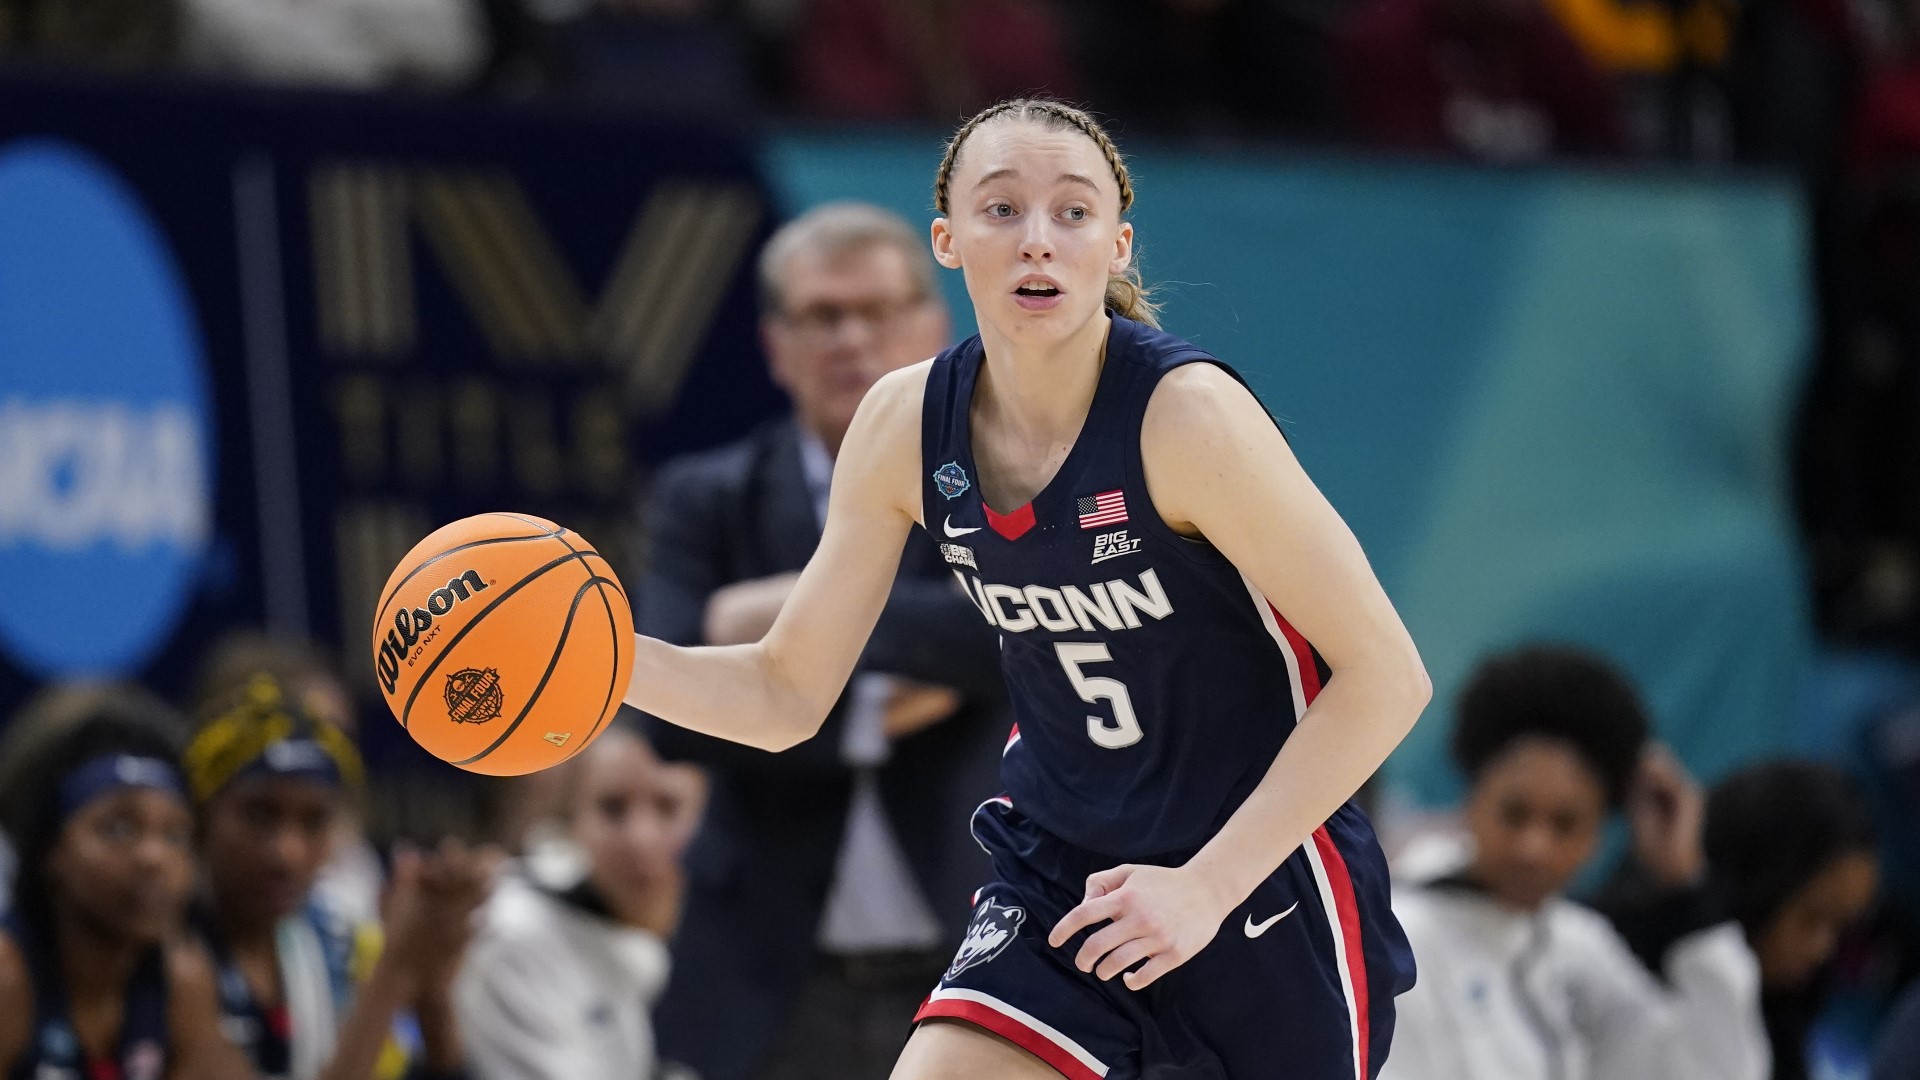 Star UConn women's basketball guard Paige Bueckers will miss the 2022-2023 season due to an injury, according to the UConn Athletics Department.